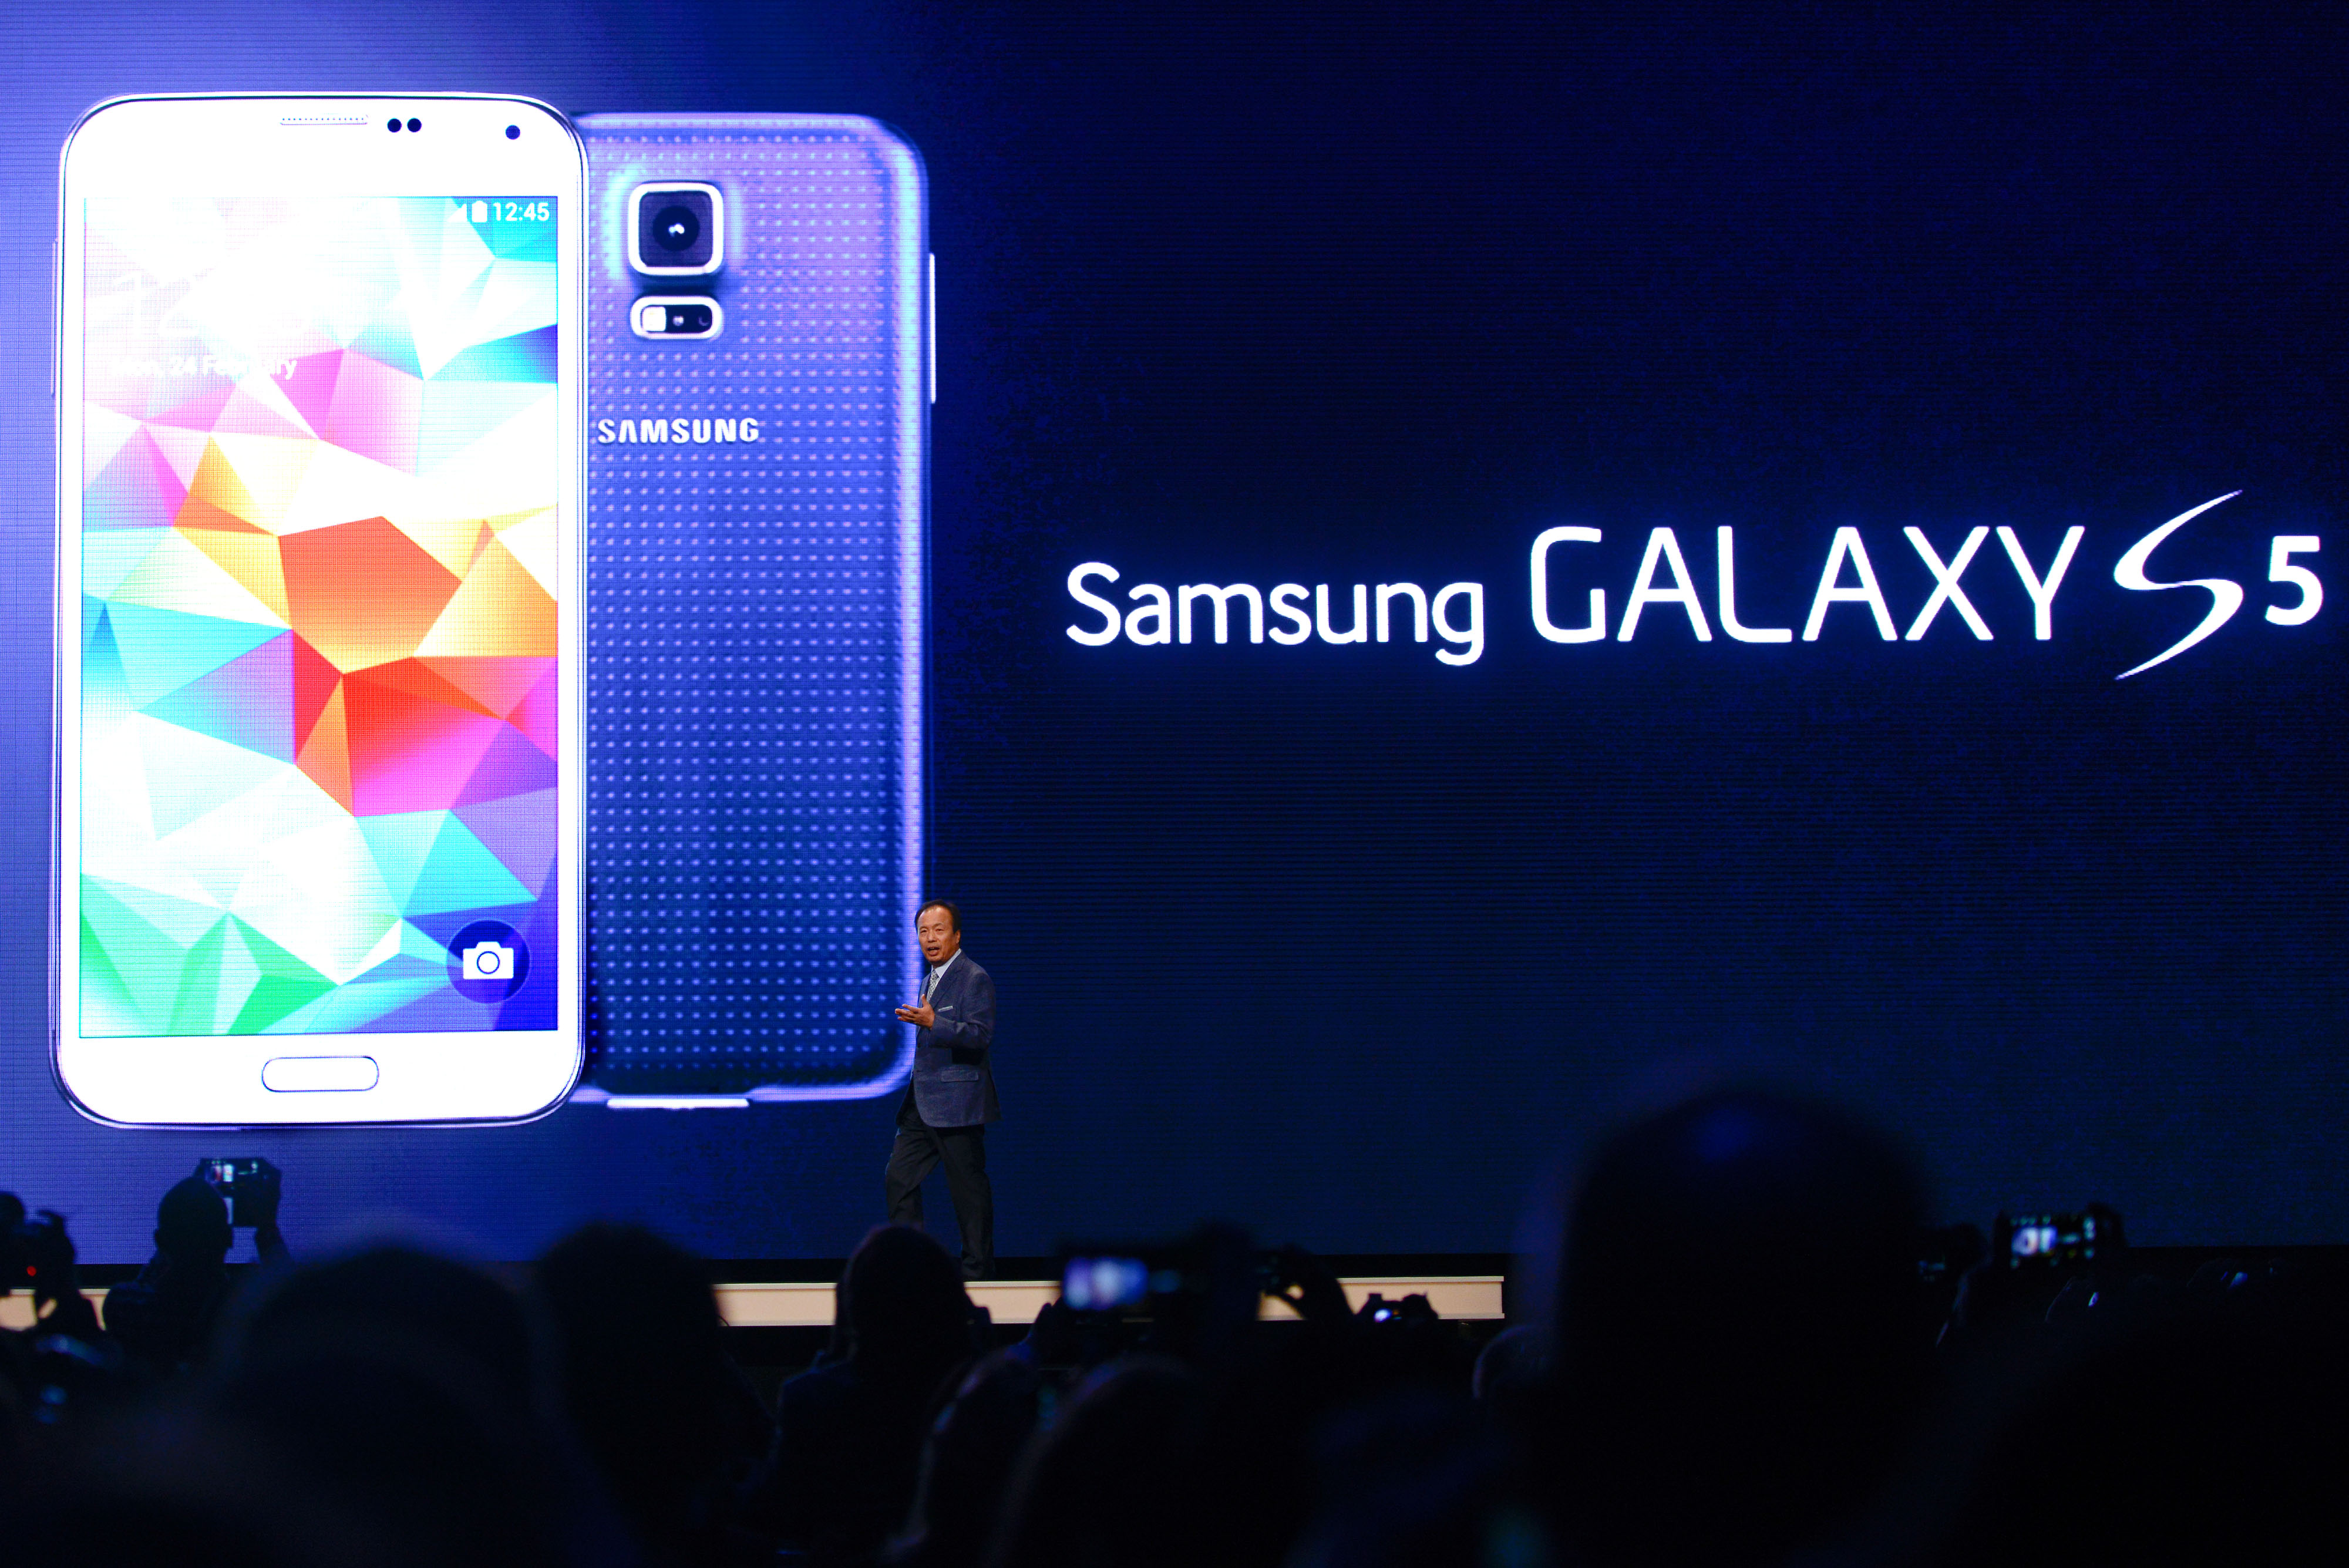 CEO and President of Samsung JK Shin walks on the stage to present the new Samsung Gear Fit and the new Samsung Galaxy S5 during the first day of the Mobile World Congress 2013 at Forum Complex on February 24, 2014 in Barcelona, Spain. (David Ramos&mdash;Getty Images)